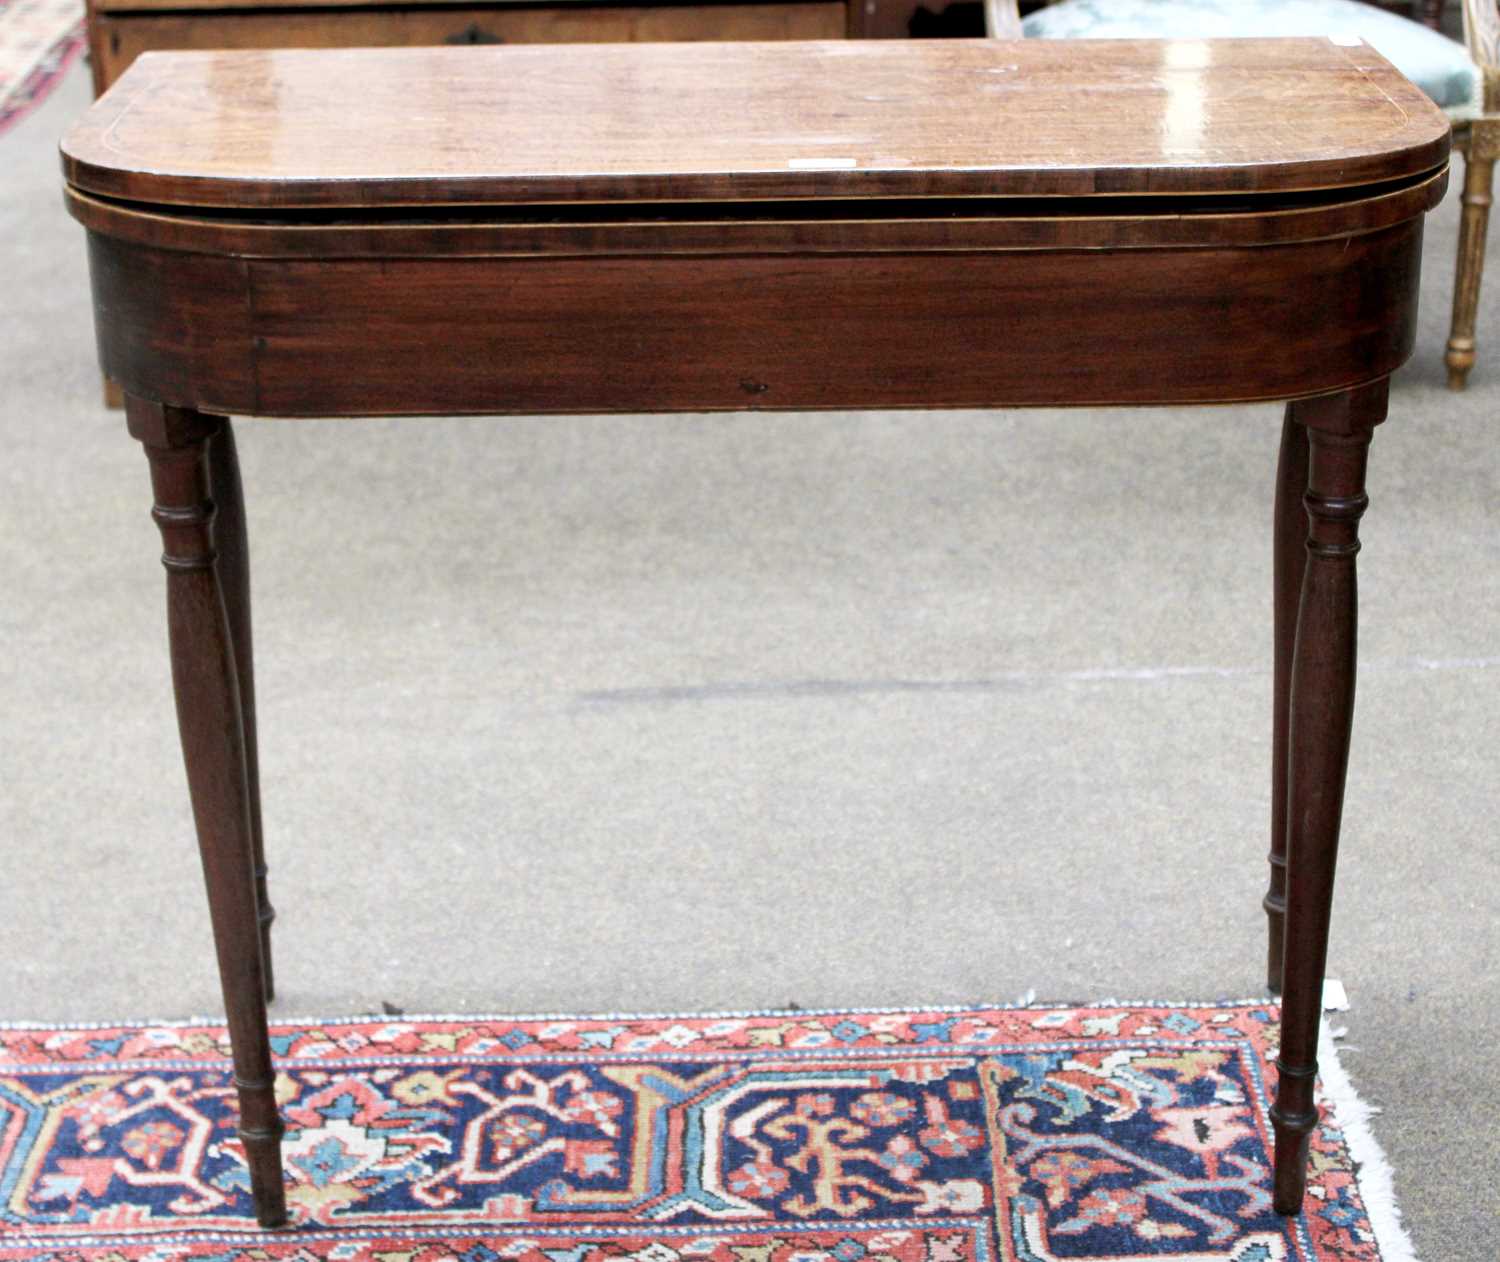 An Early 19th century Mahogany Fold Over Tea Table, raised on slender turned legs, 75cm by 86cm by